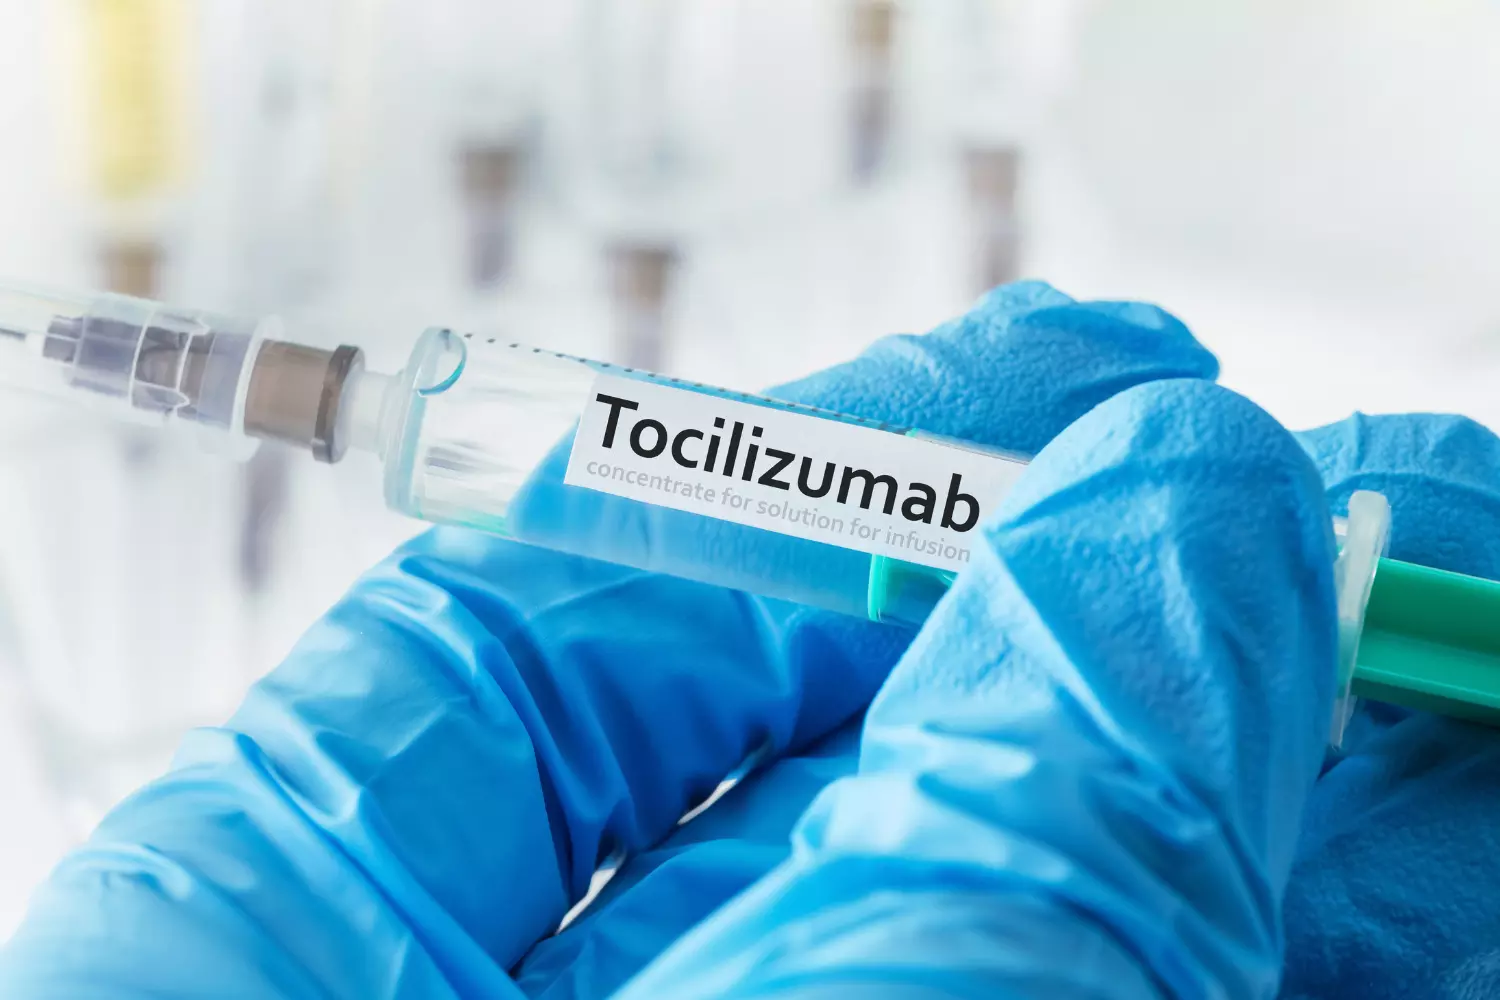 When to Start Tocilizumab in Moderate to Severe COVID 19 Patients?